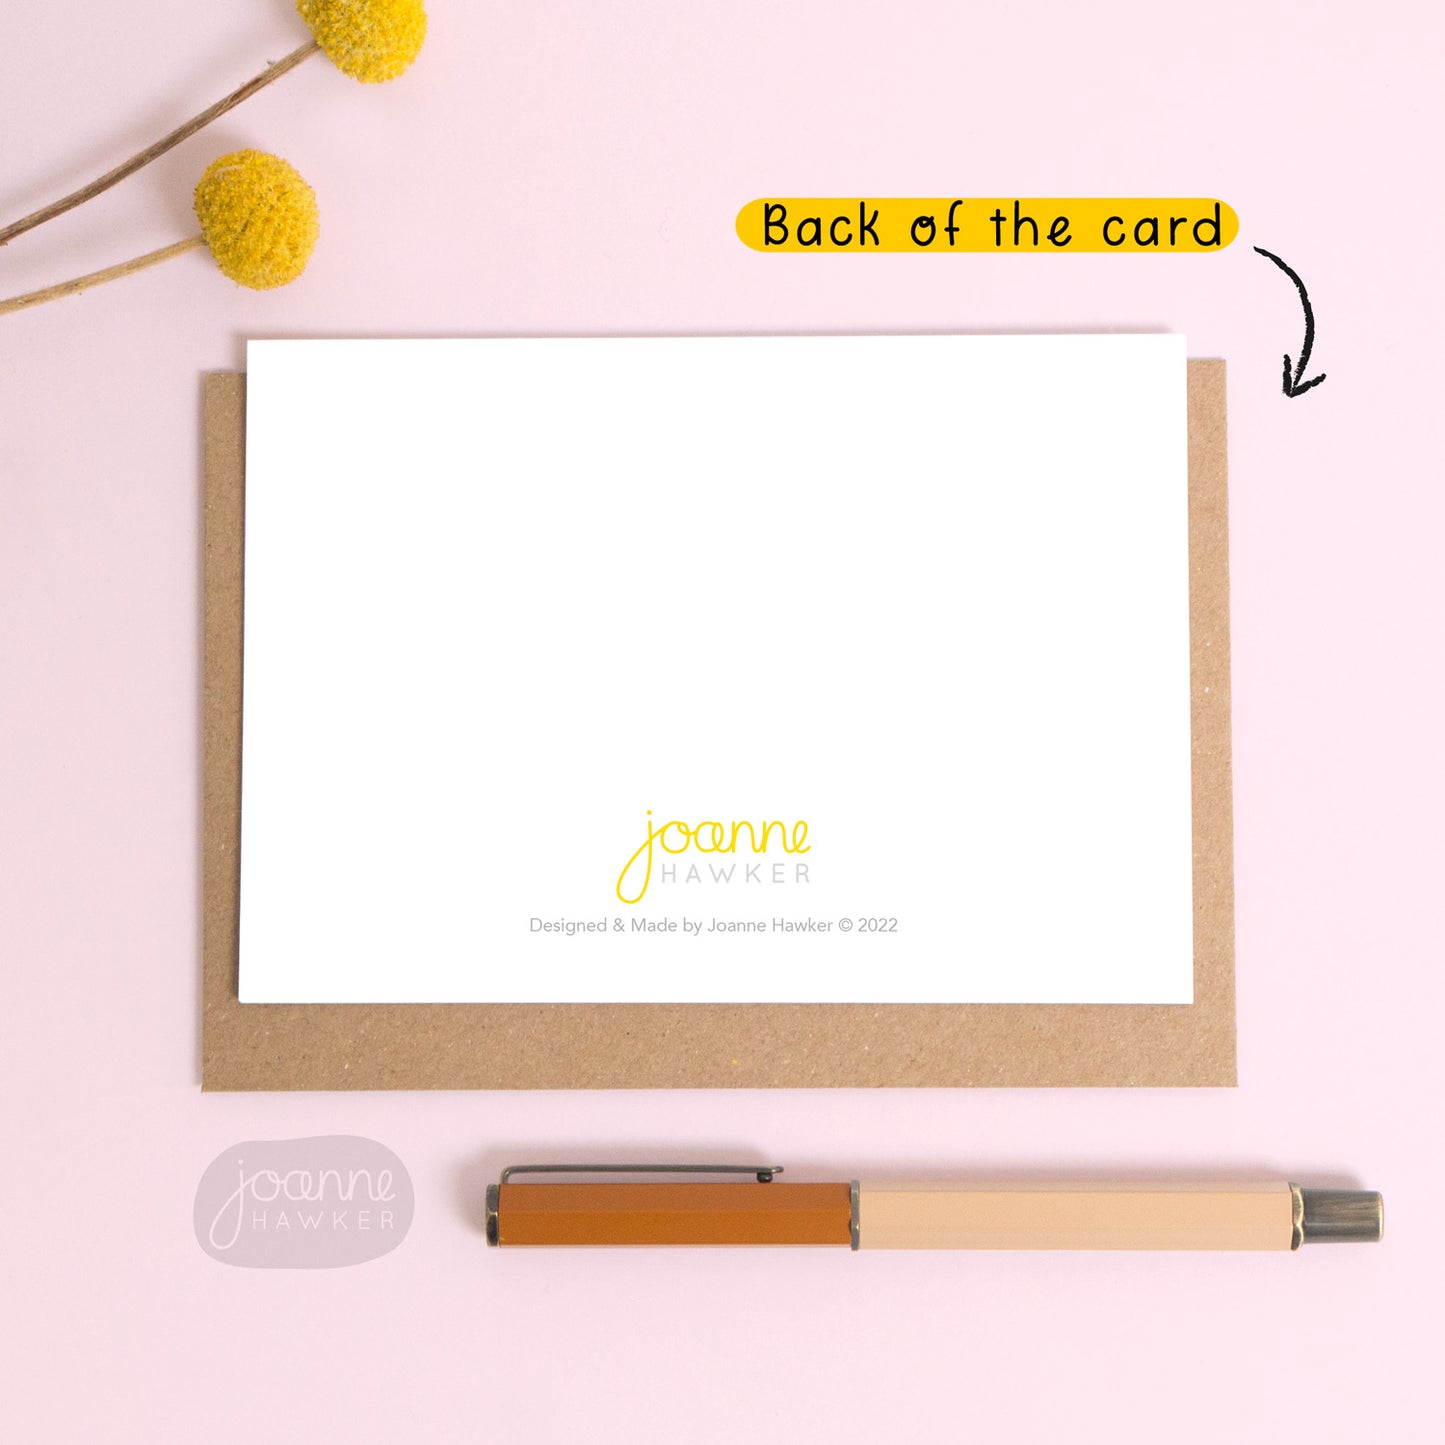 This image demonstrates the back of the greetings card. The card is in landscape format and shows the ‘Joanne Hawker’ logo and copyright information bottom centre. The card is laid down on top of a Kraft brown envelope and photographed on a pink background with text pointing to the card reading “back of the card”.